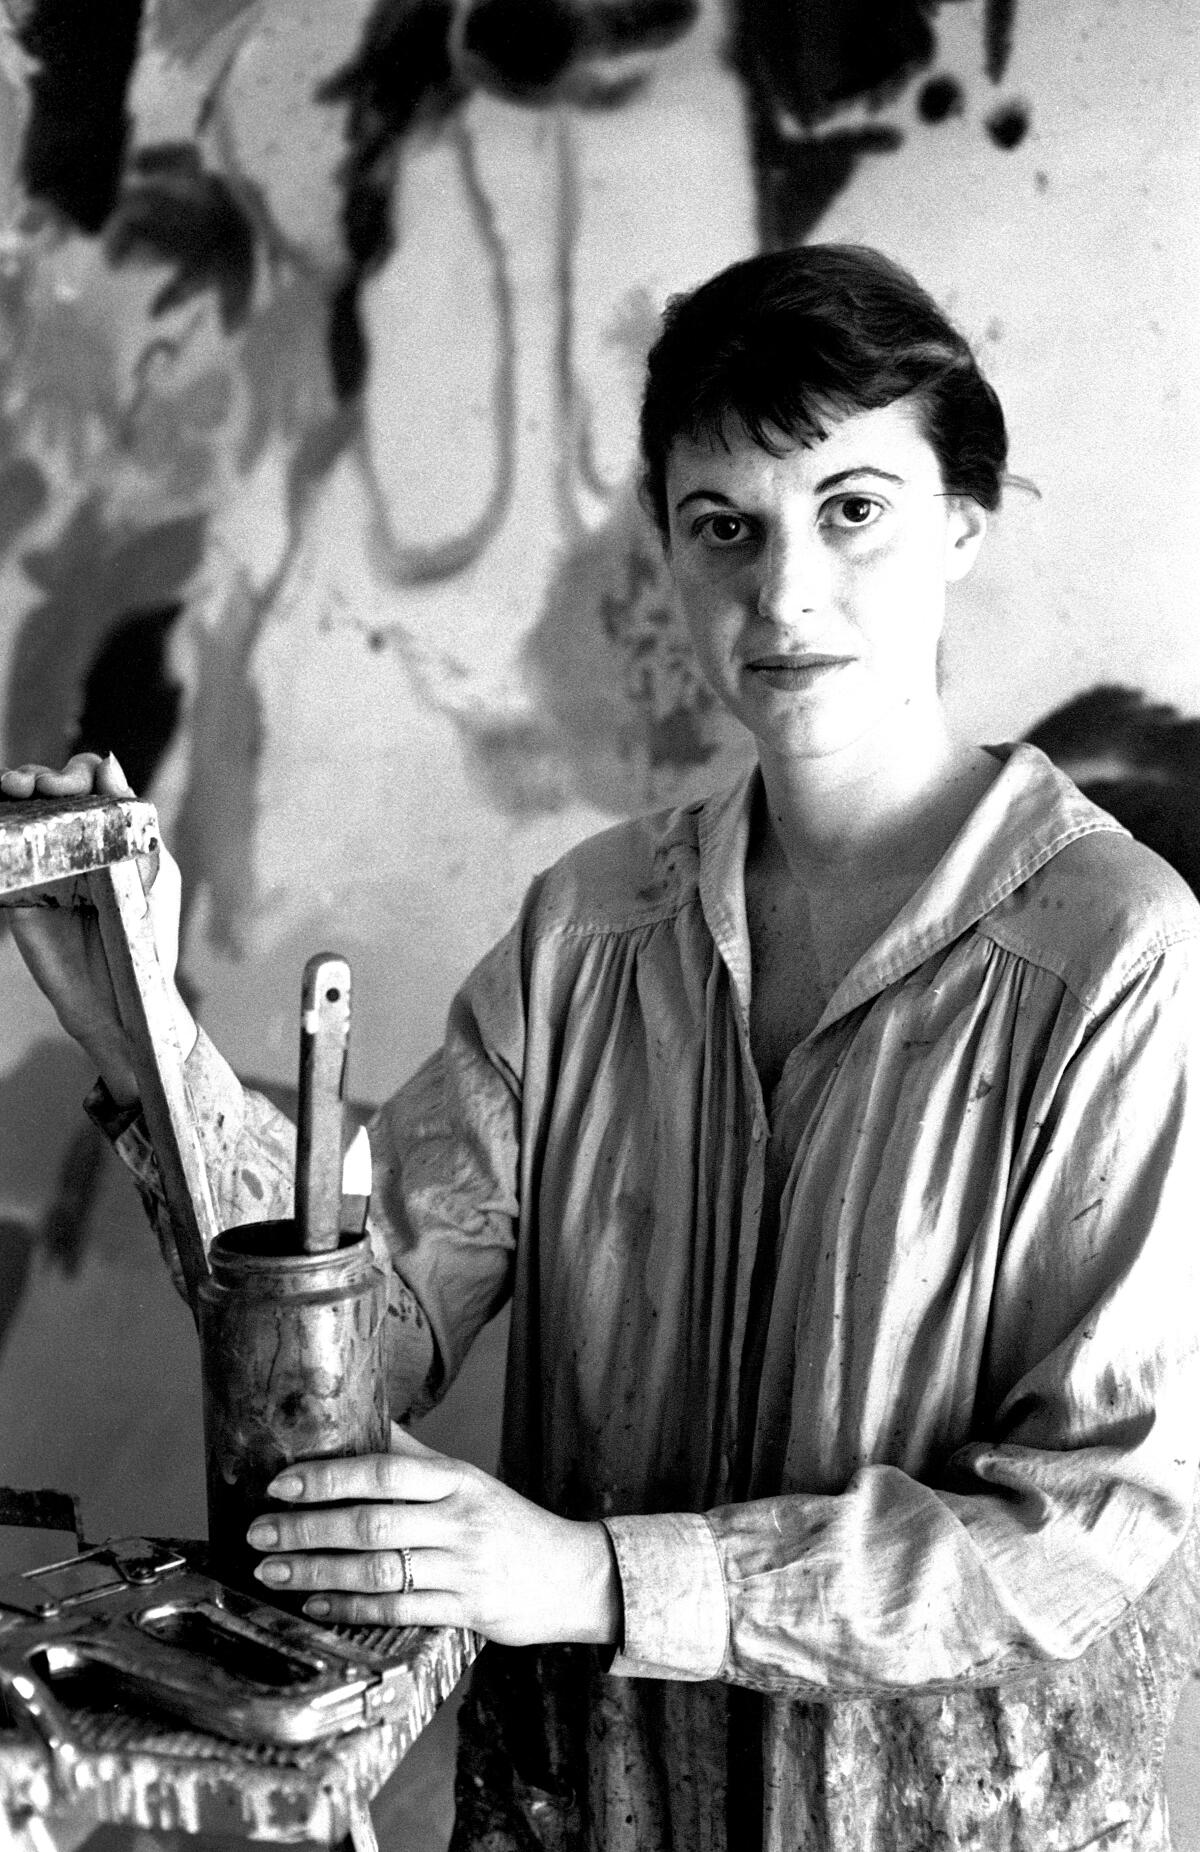 Helen Frankenthaler, Abstract Expressionist painter, in a smock and holding a paint bottle.